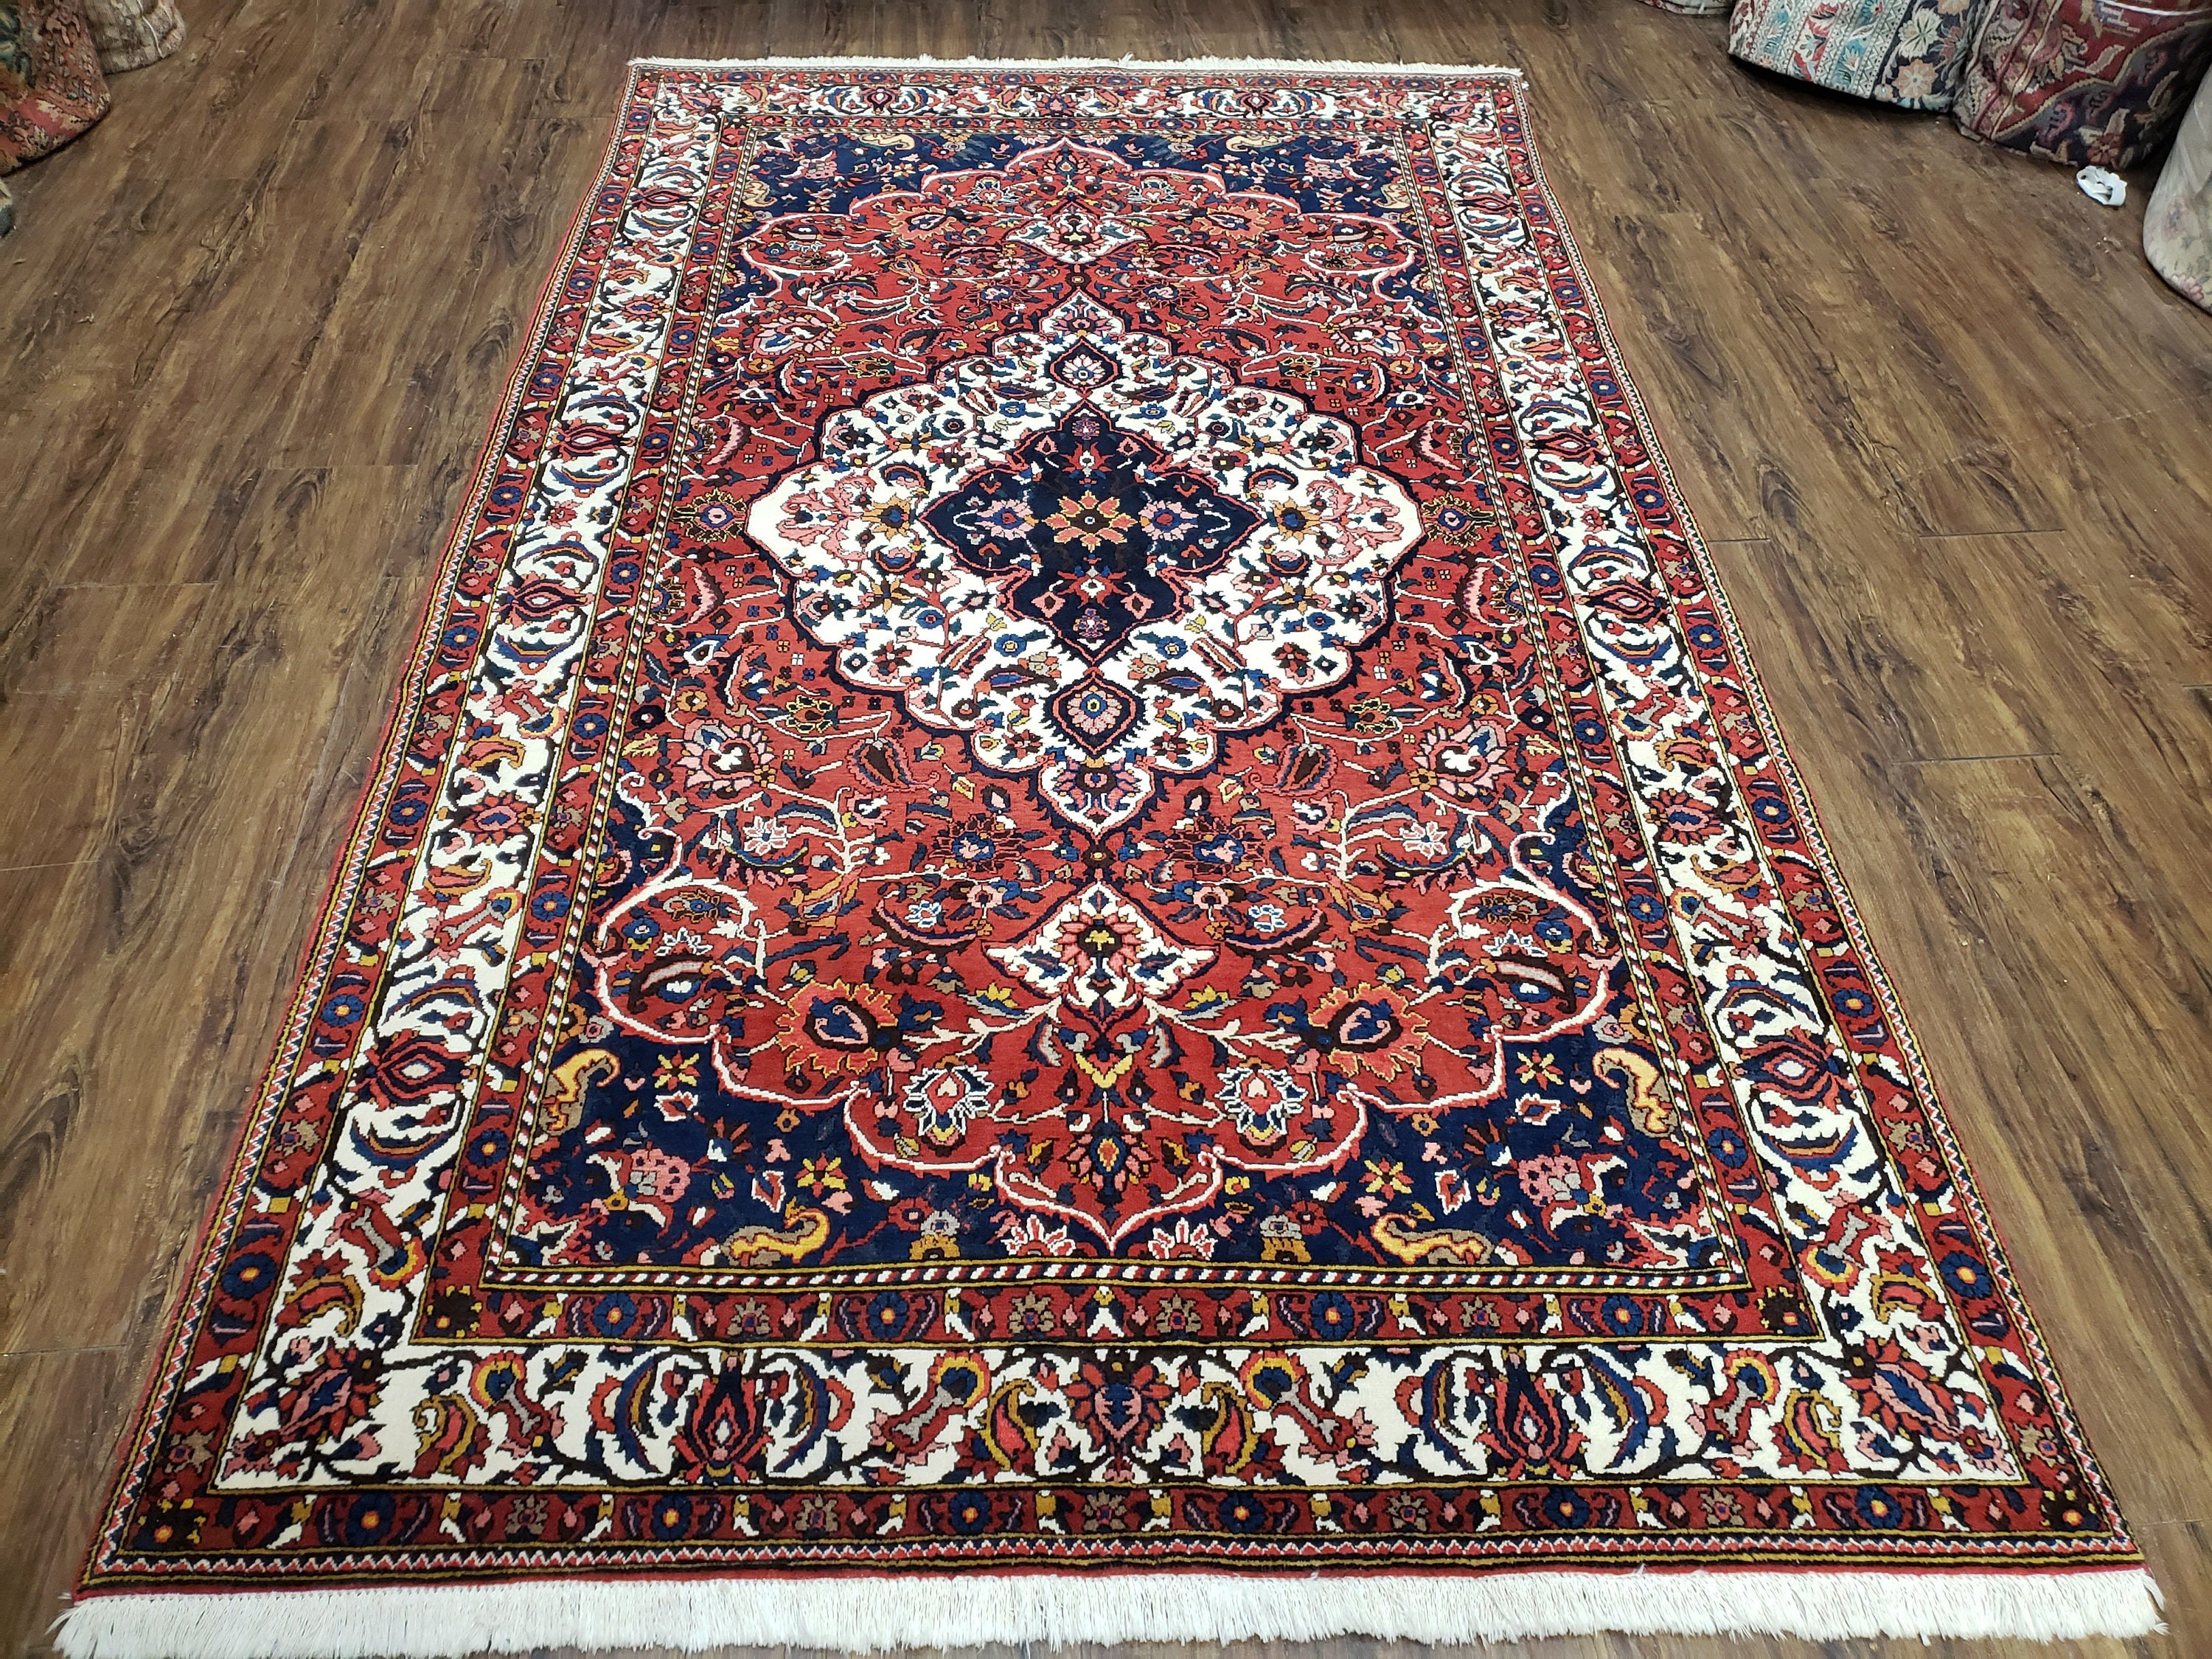 Red Persian Rug, 5.1 X 8.6 Ft, 1940s Persian Carpet, Handmade Oriental Rug,  Allover Floral Medallion, Red Midnight Blue Ivory, 5x9 Wool Rug -   Canada